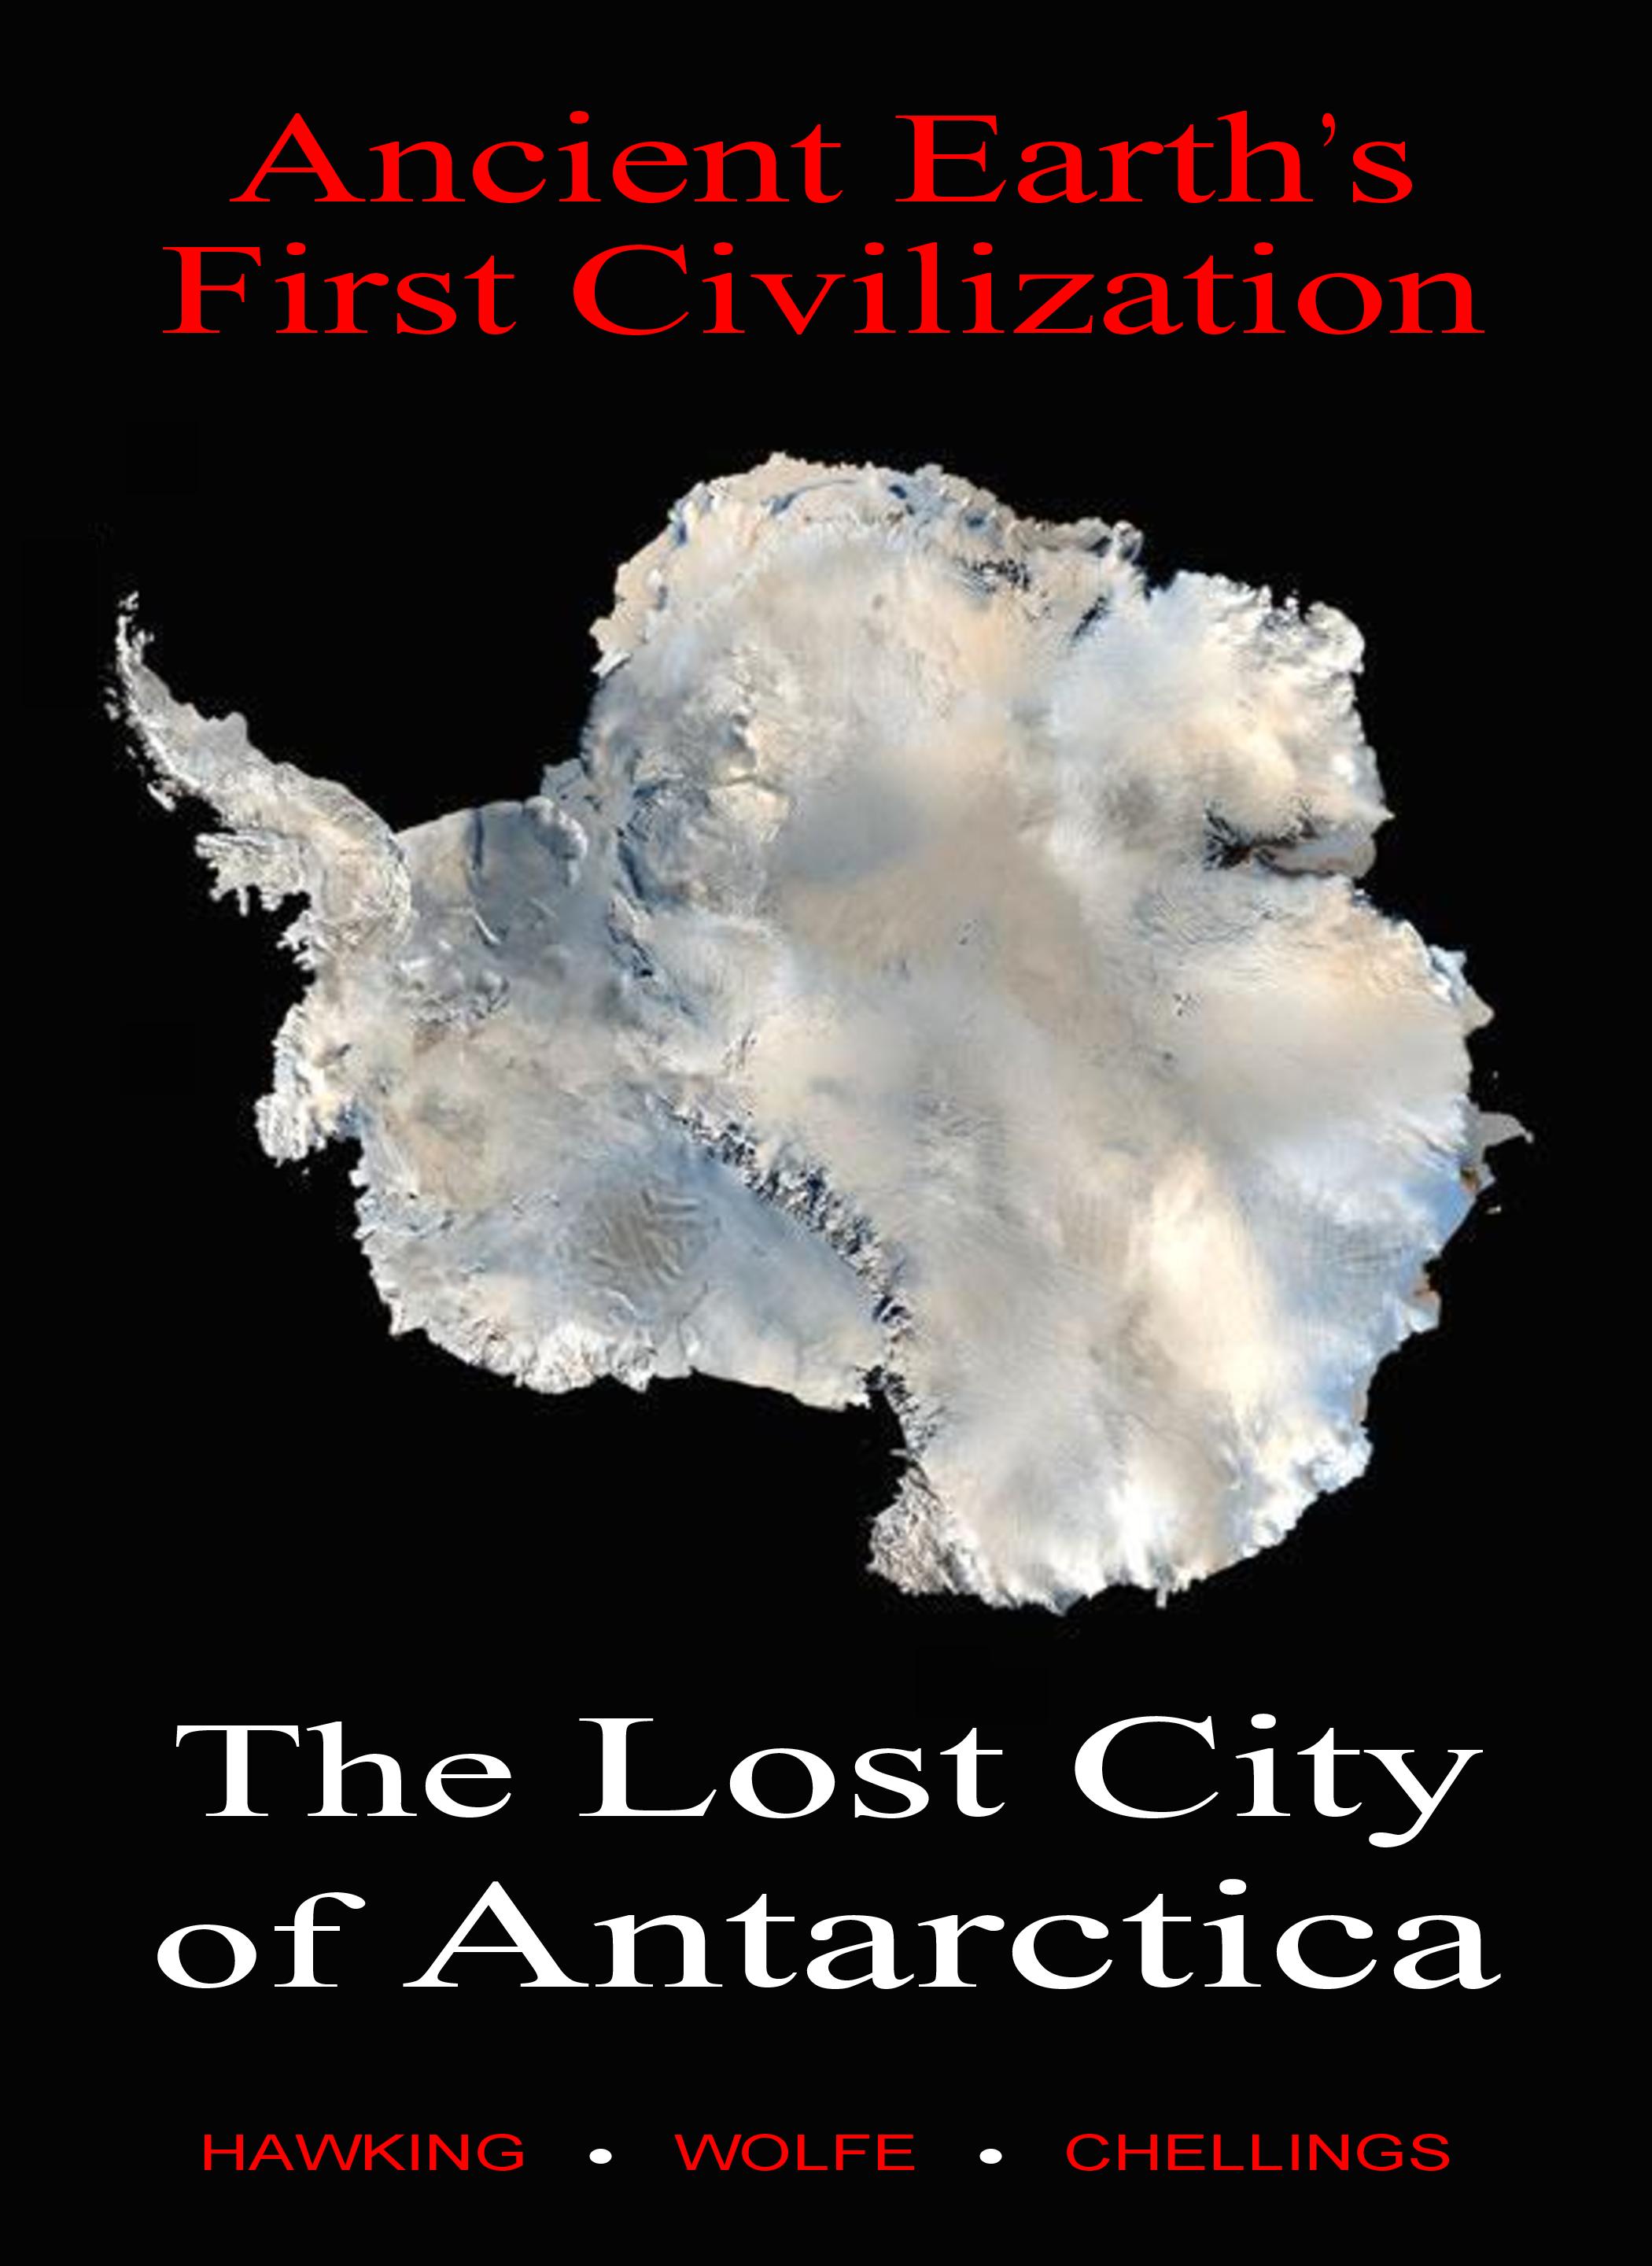 The Lost City of Antarctica book cover